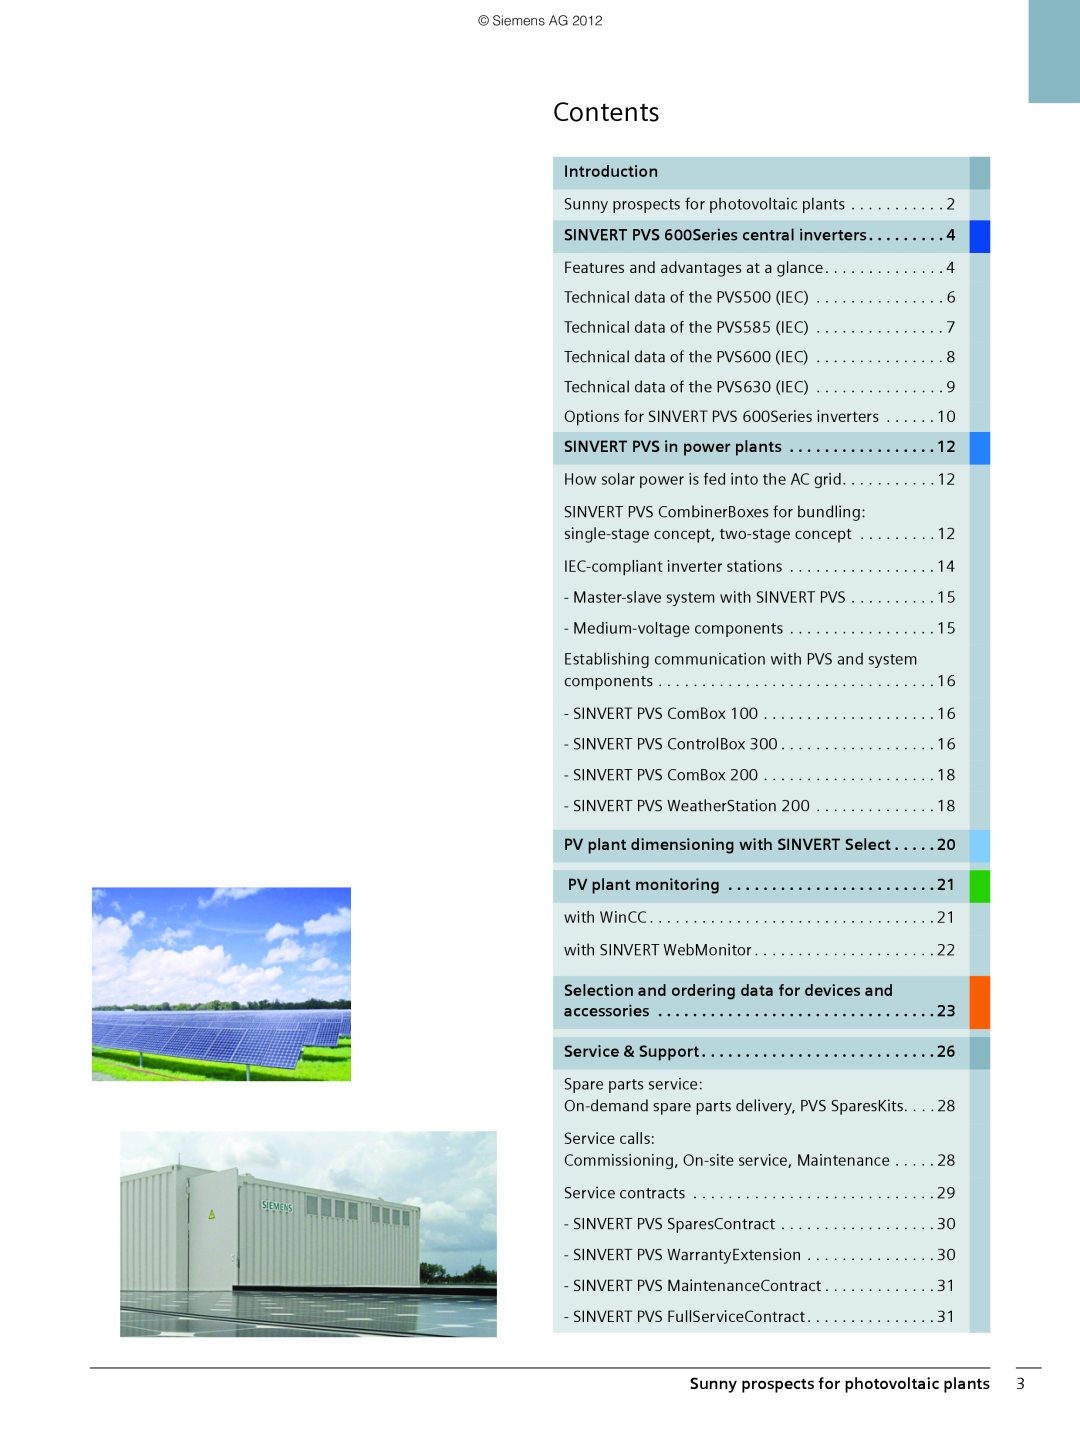 Siemens 600 brochure Contents, Introduction, Sunny prospects for photovoltaic plants 